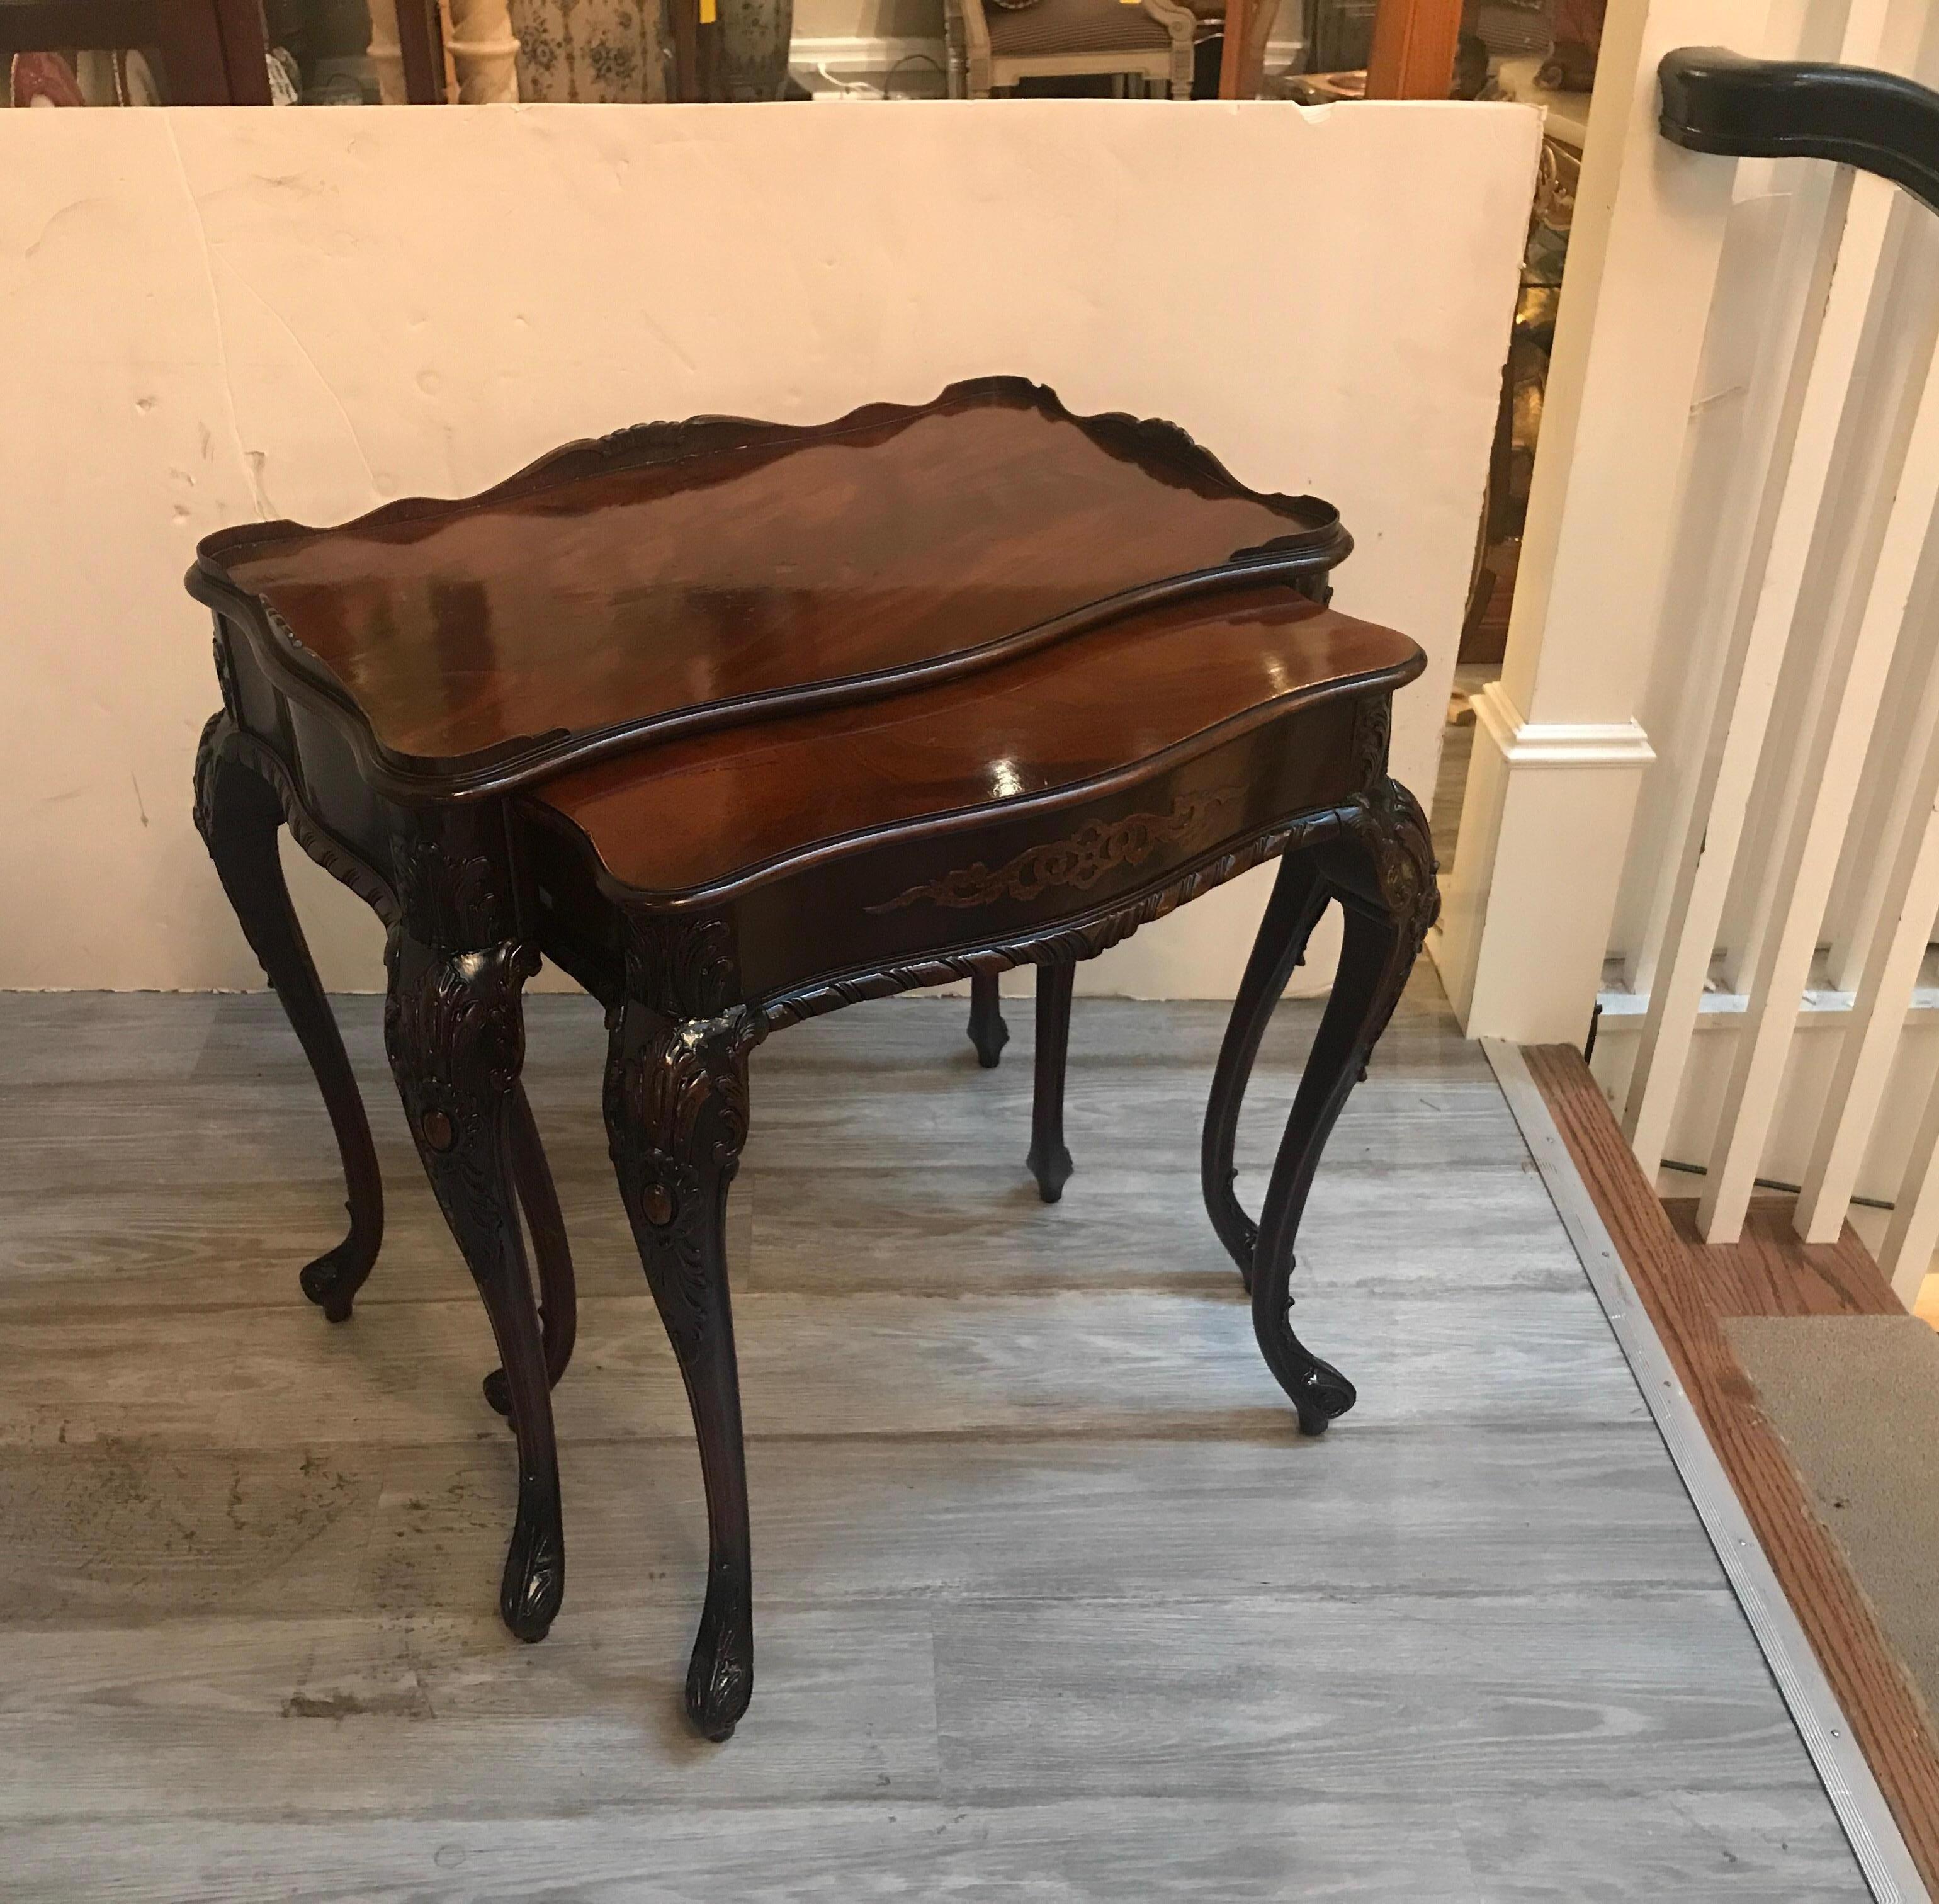 A pair of elegant hand carved mahogany nest of tables. The flame mahogany tops with gallery edge on the larger table with a smaller table that fits underneath. Beautiful carved apron and legs. These tables with recent French polish but retains some